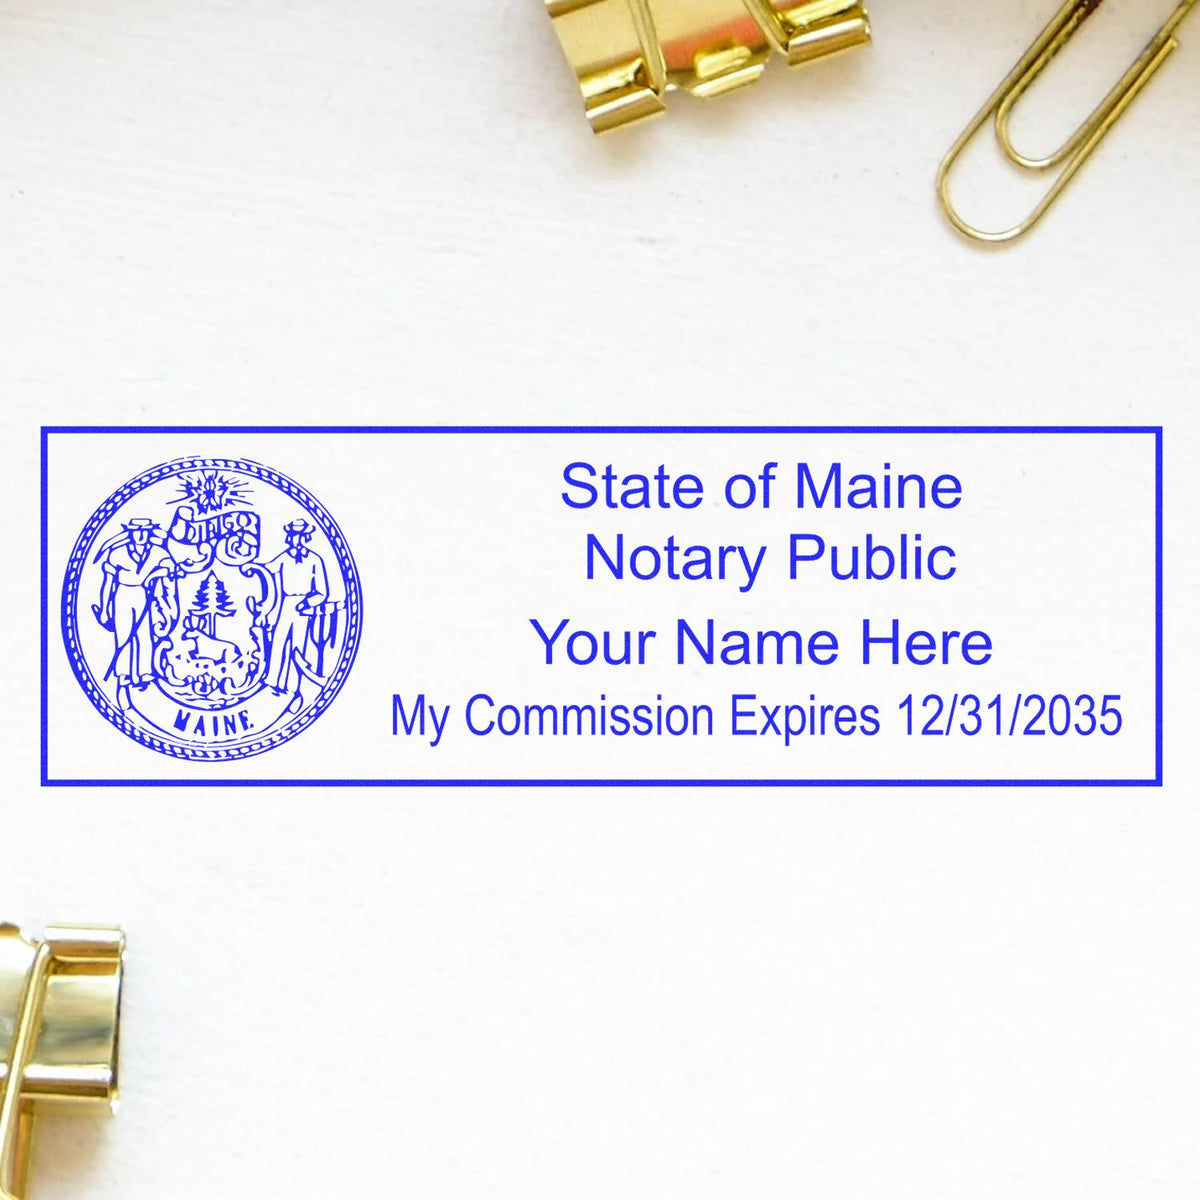 The PSI Maine Notary Stamp stamp impression comes to life with a crisp, detailed photo on paper - showcasing true professional quality.